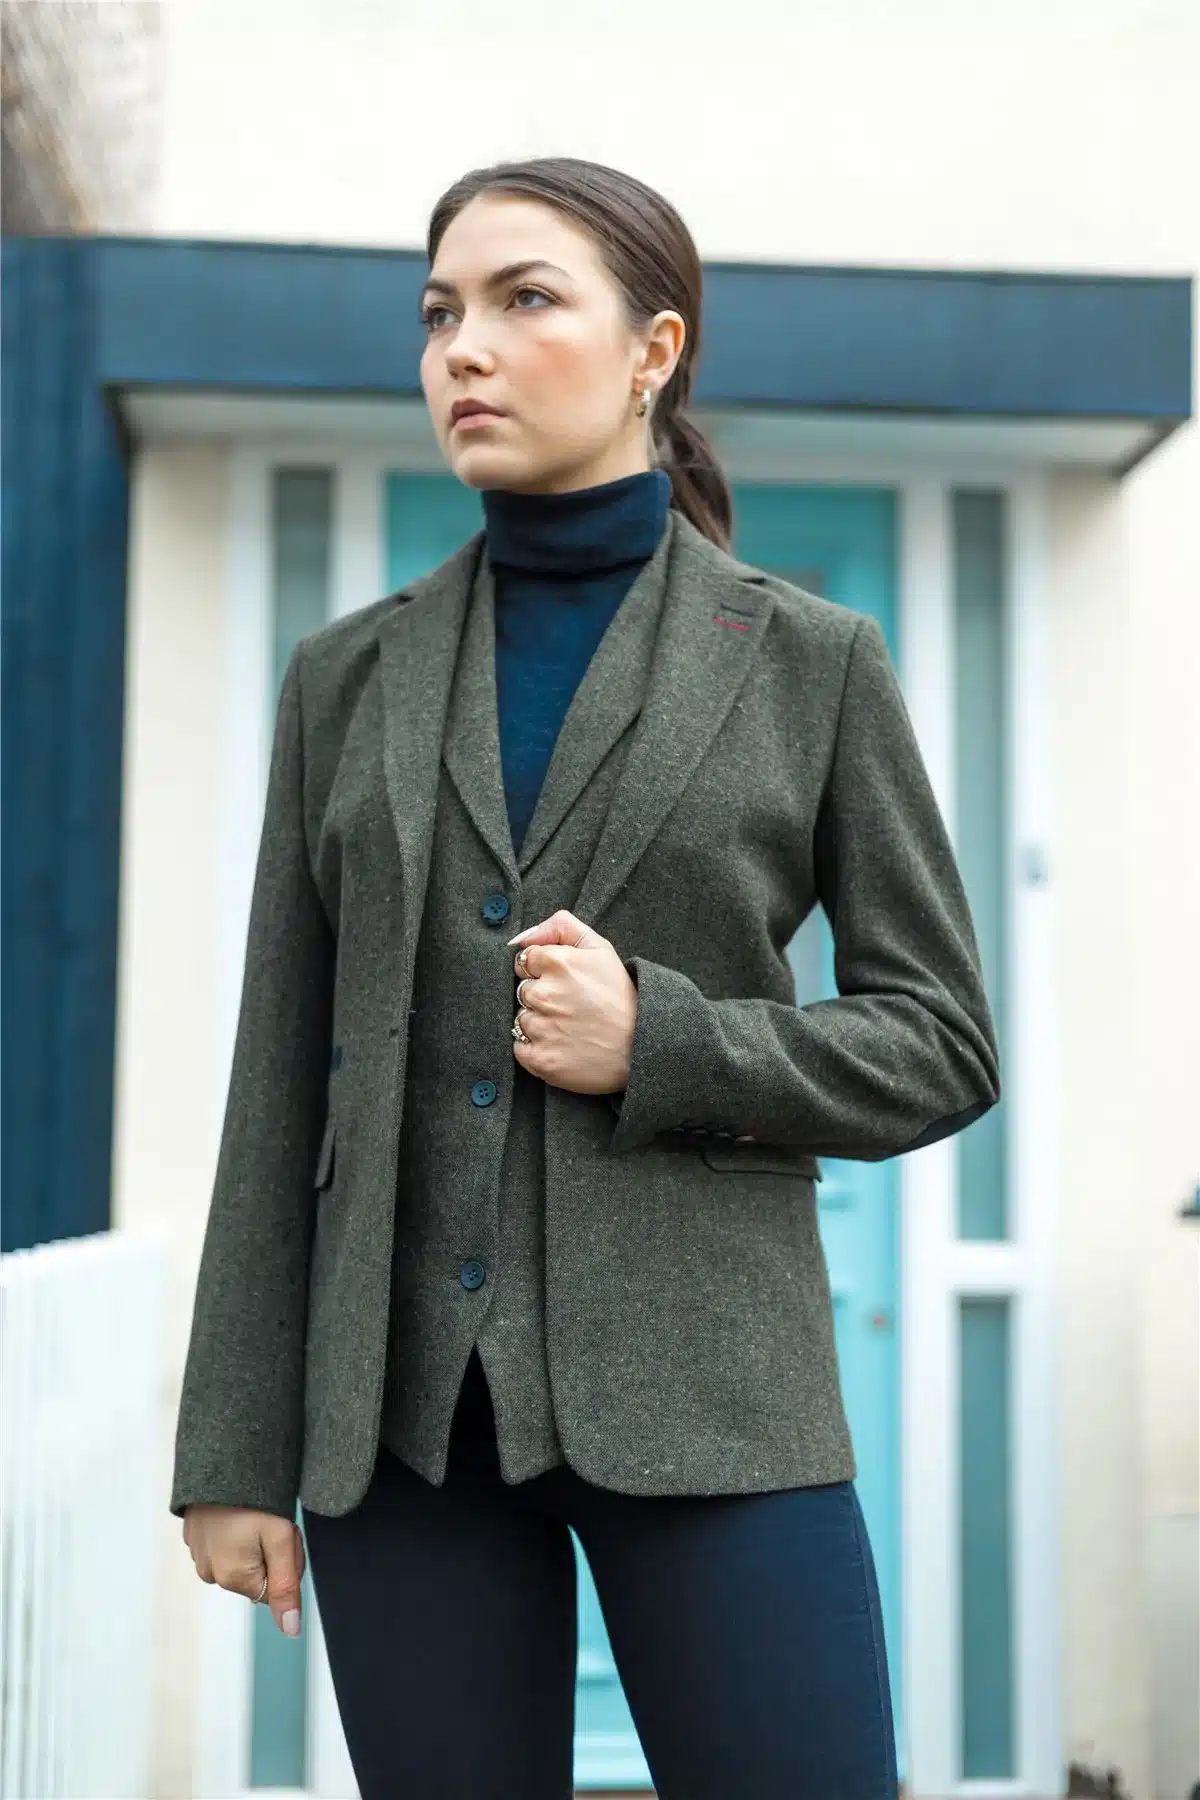 Tweed jacket with patches  Elbow patch jacket, Leather elbow